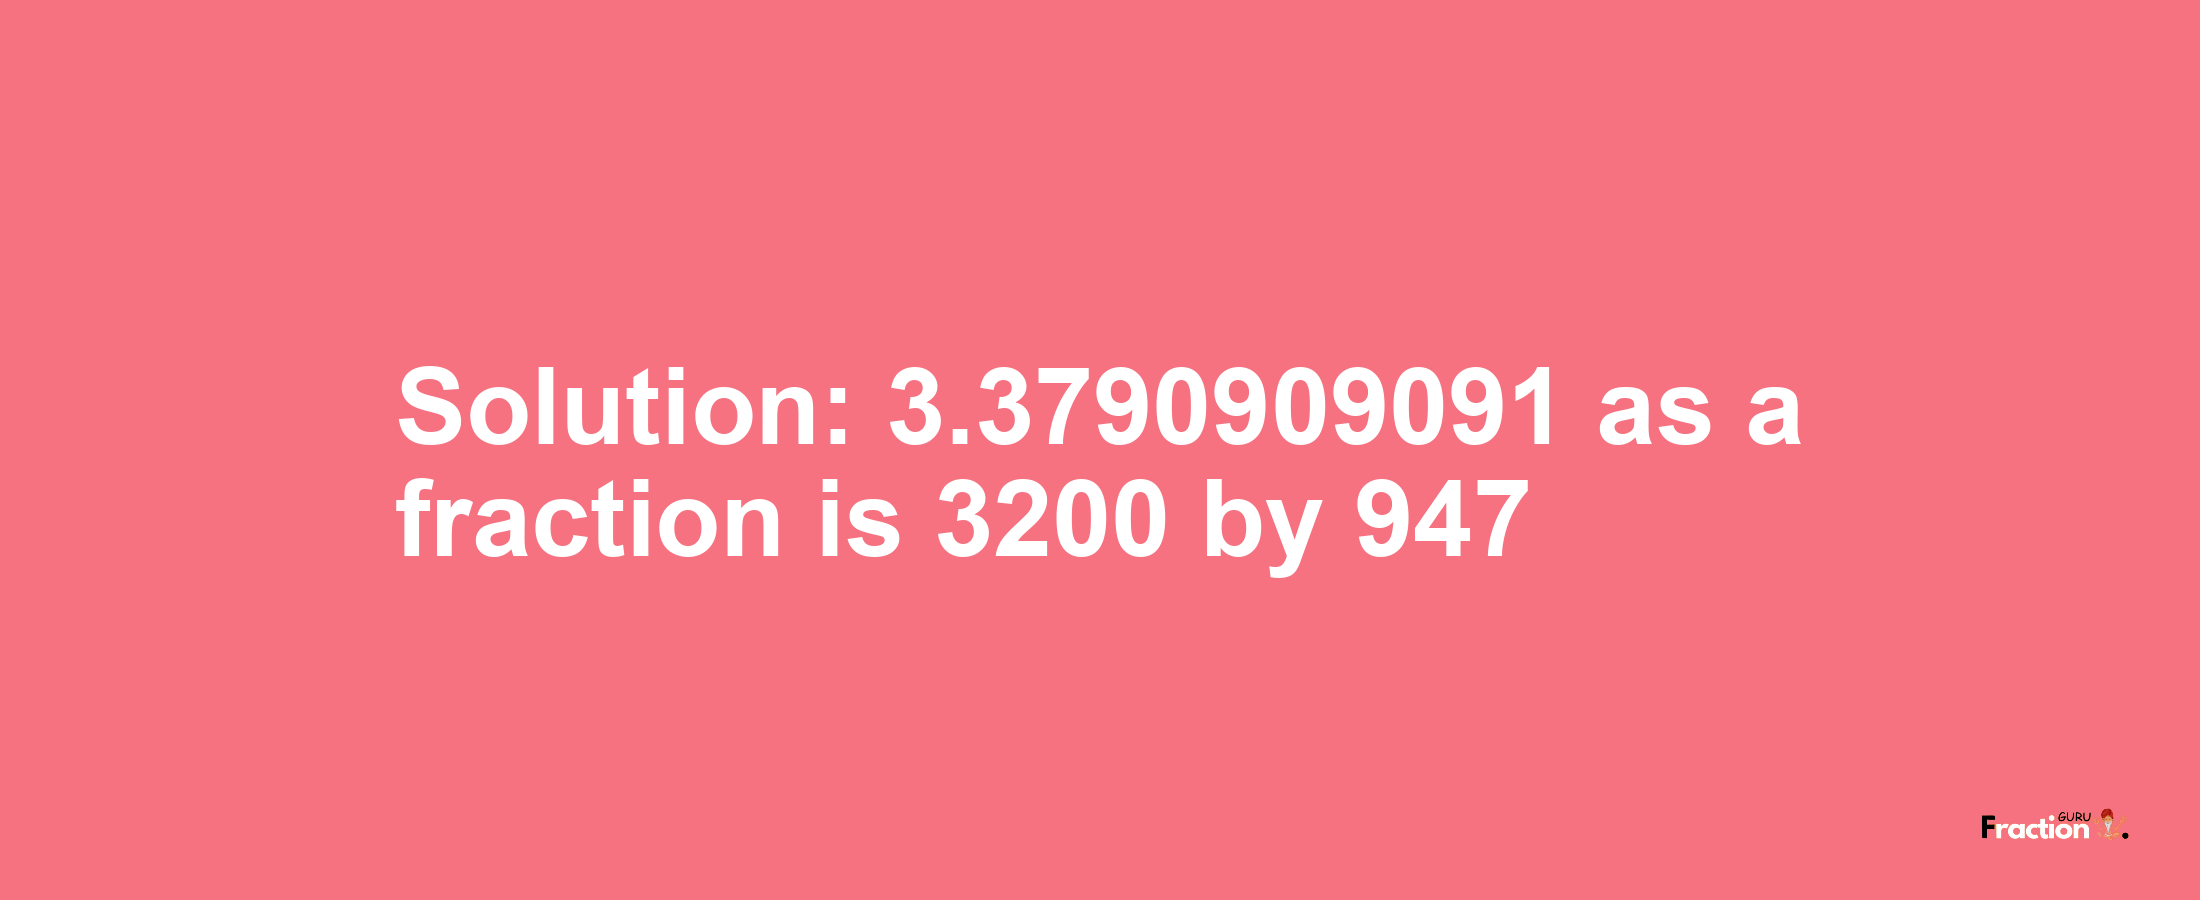 Solution:3.3790909091 as a fraction is 3200/947